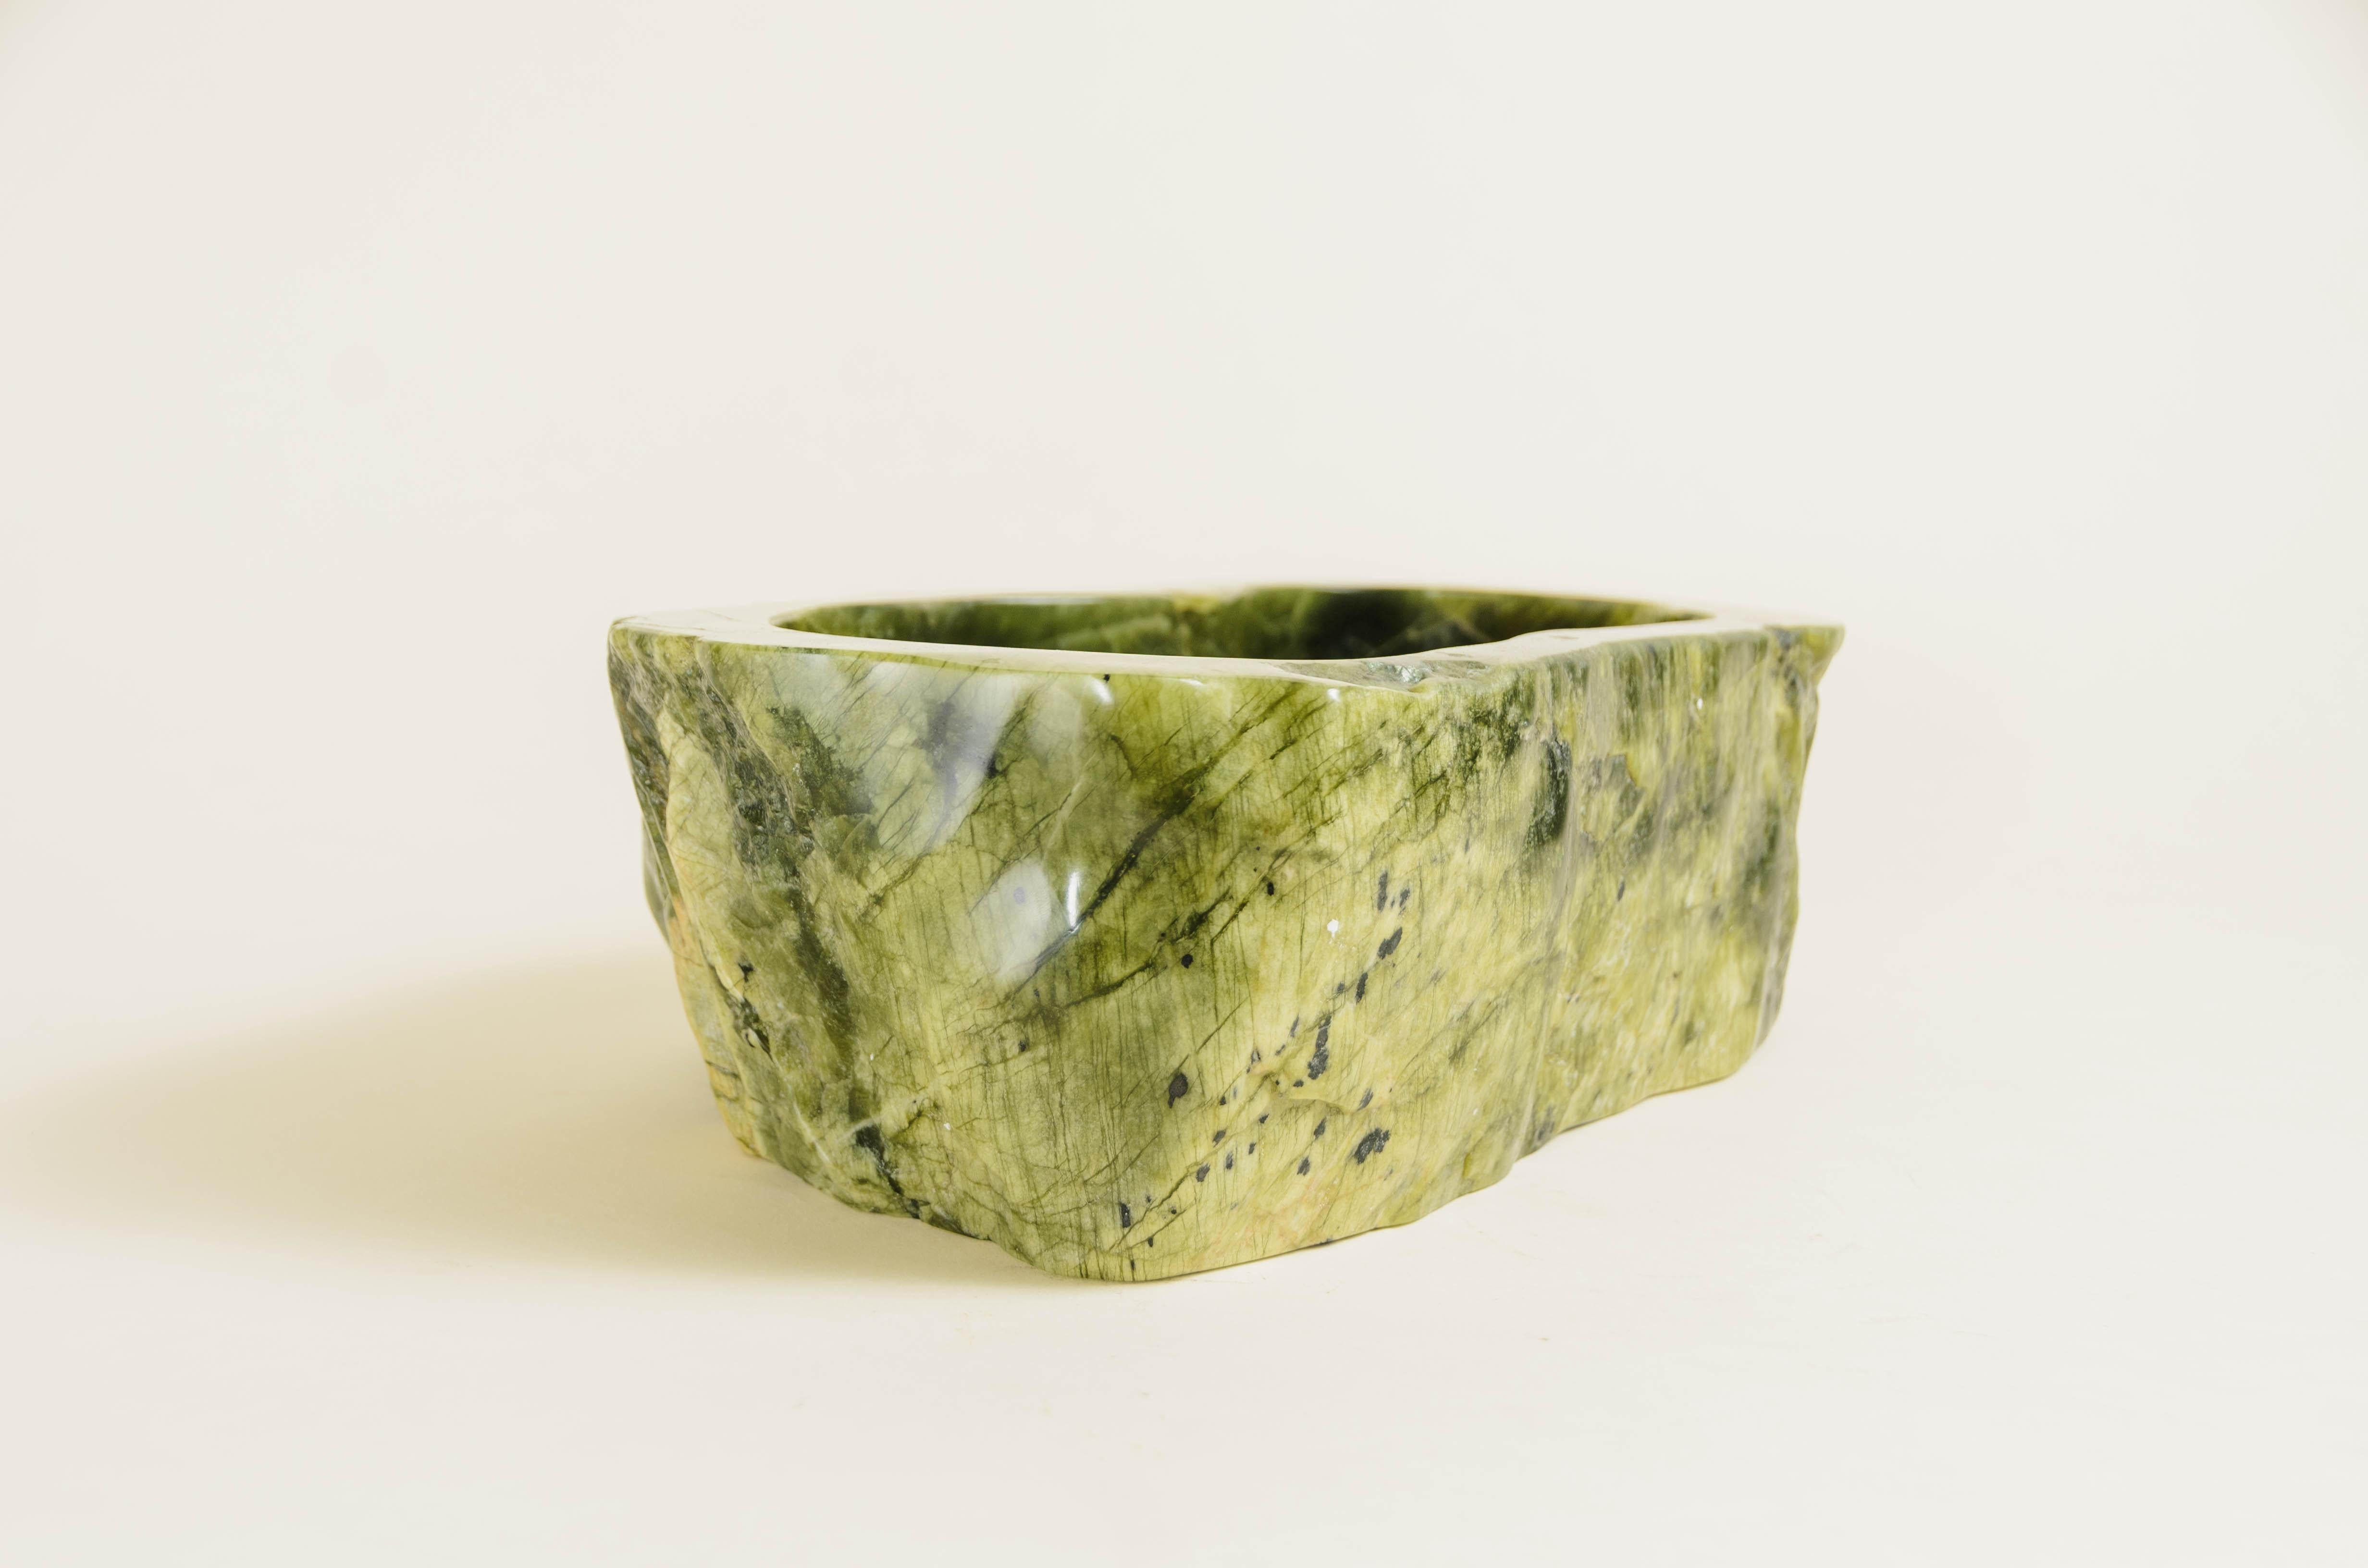 Hand-Carved Contemporary Nephrite Jade Oblong Cachepot by Robert Kuo, Limited Edition For Sale